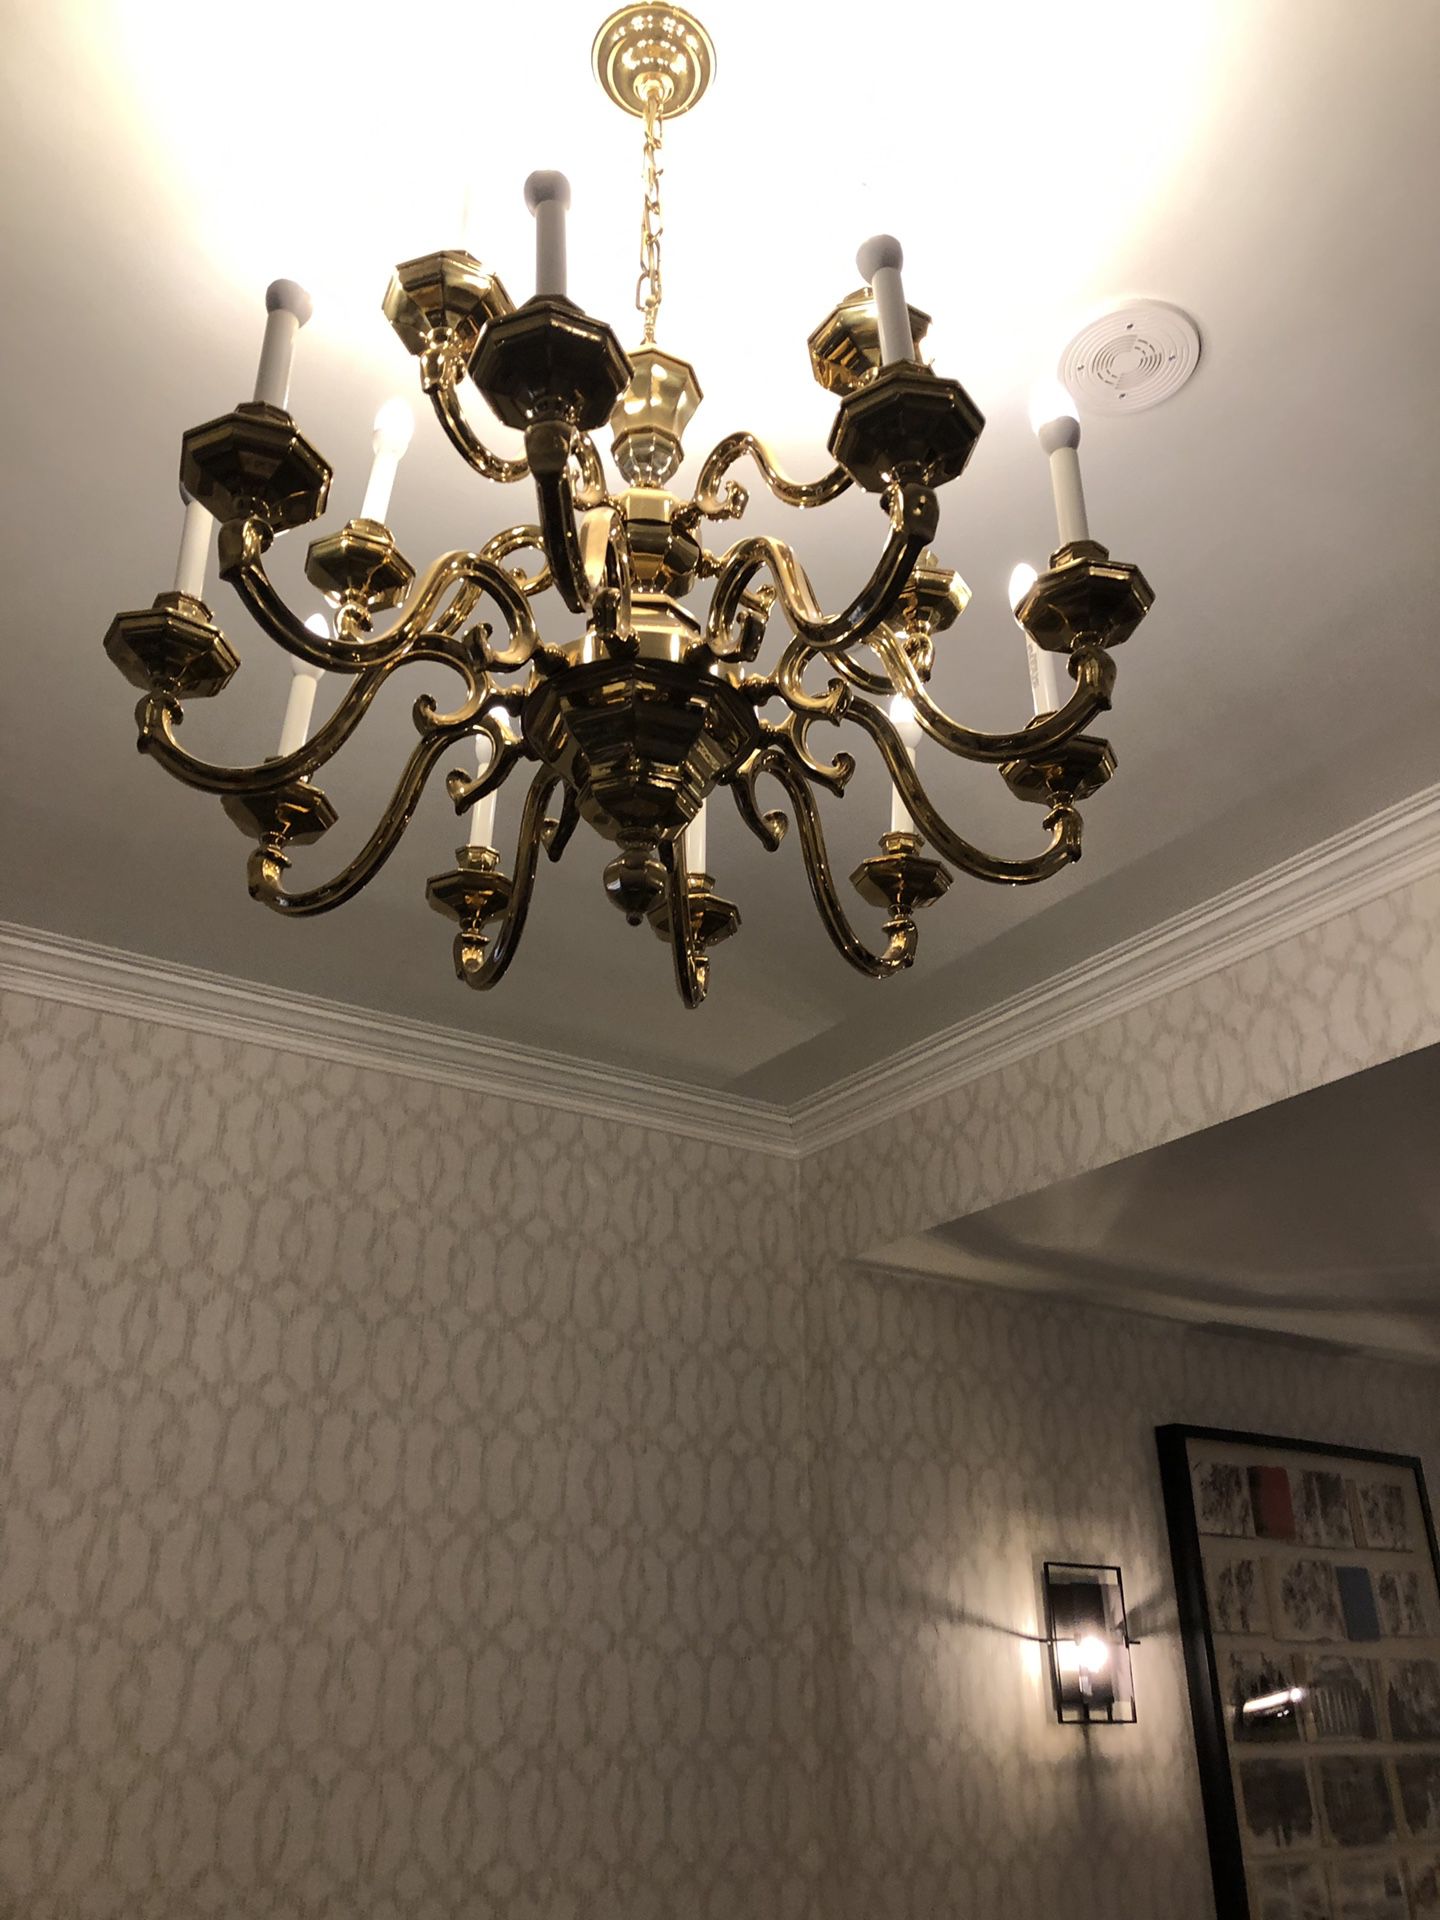 Nice chandeliers on sale now good deal ...offer